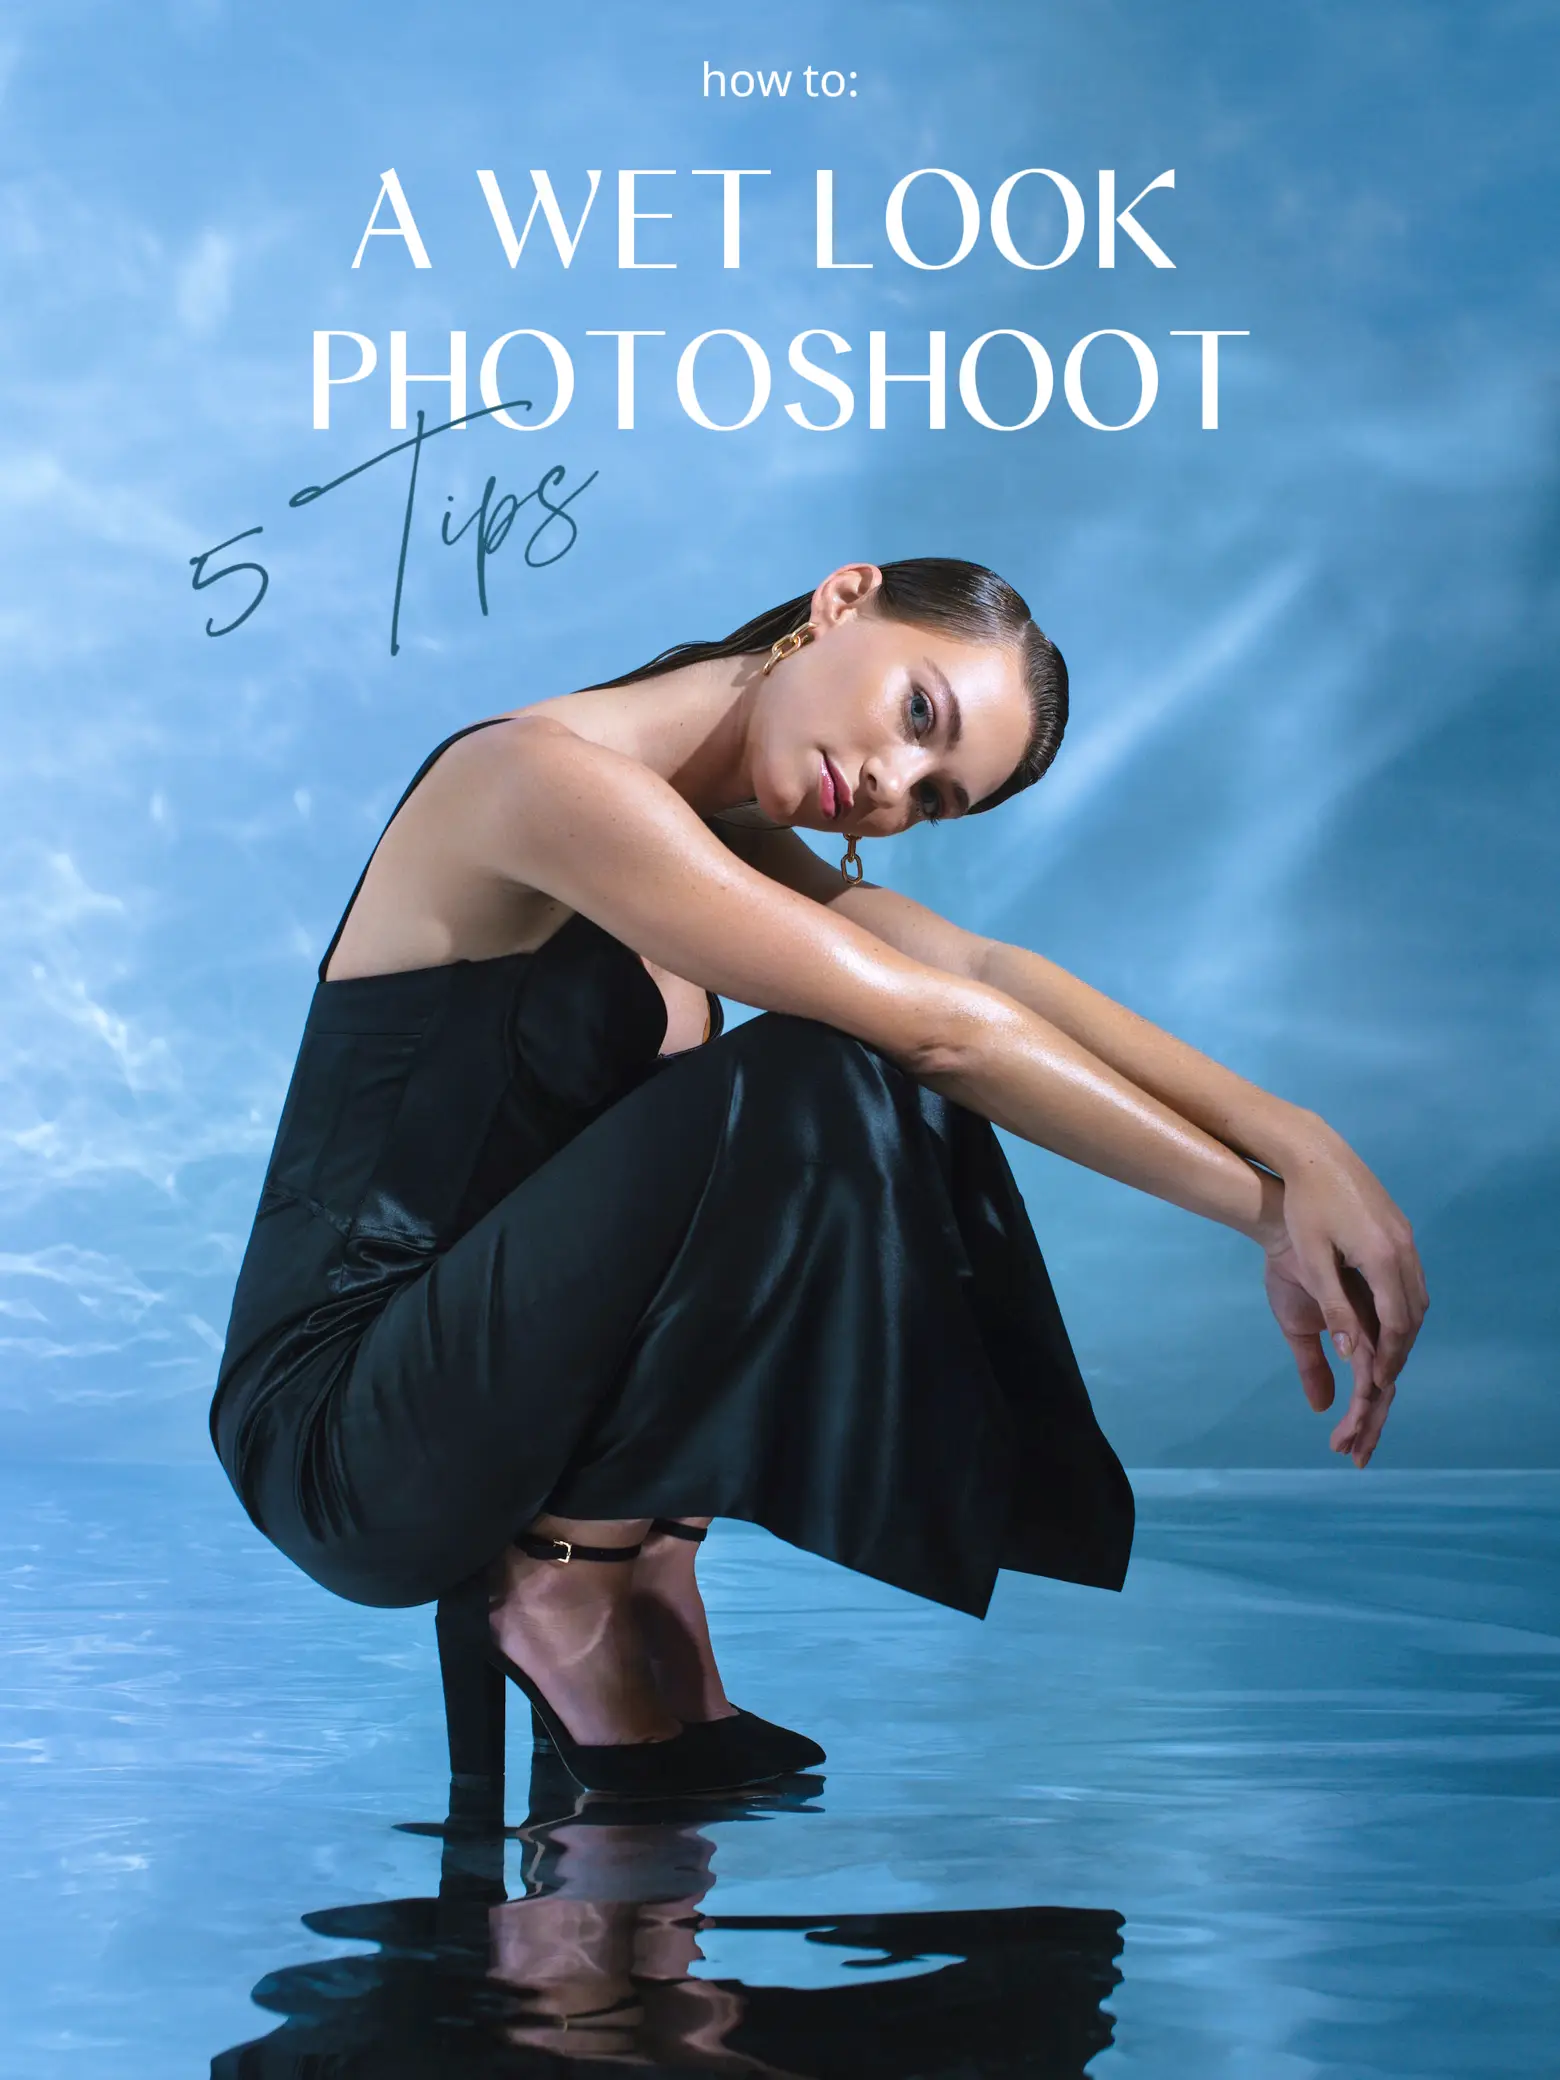 Photo shoot tips for a wet look  Video published by Kristinamoto